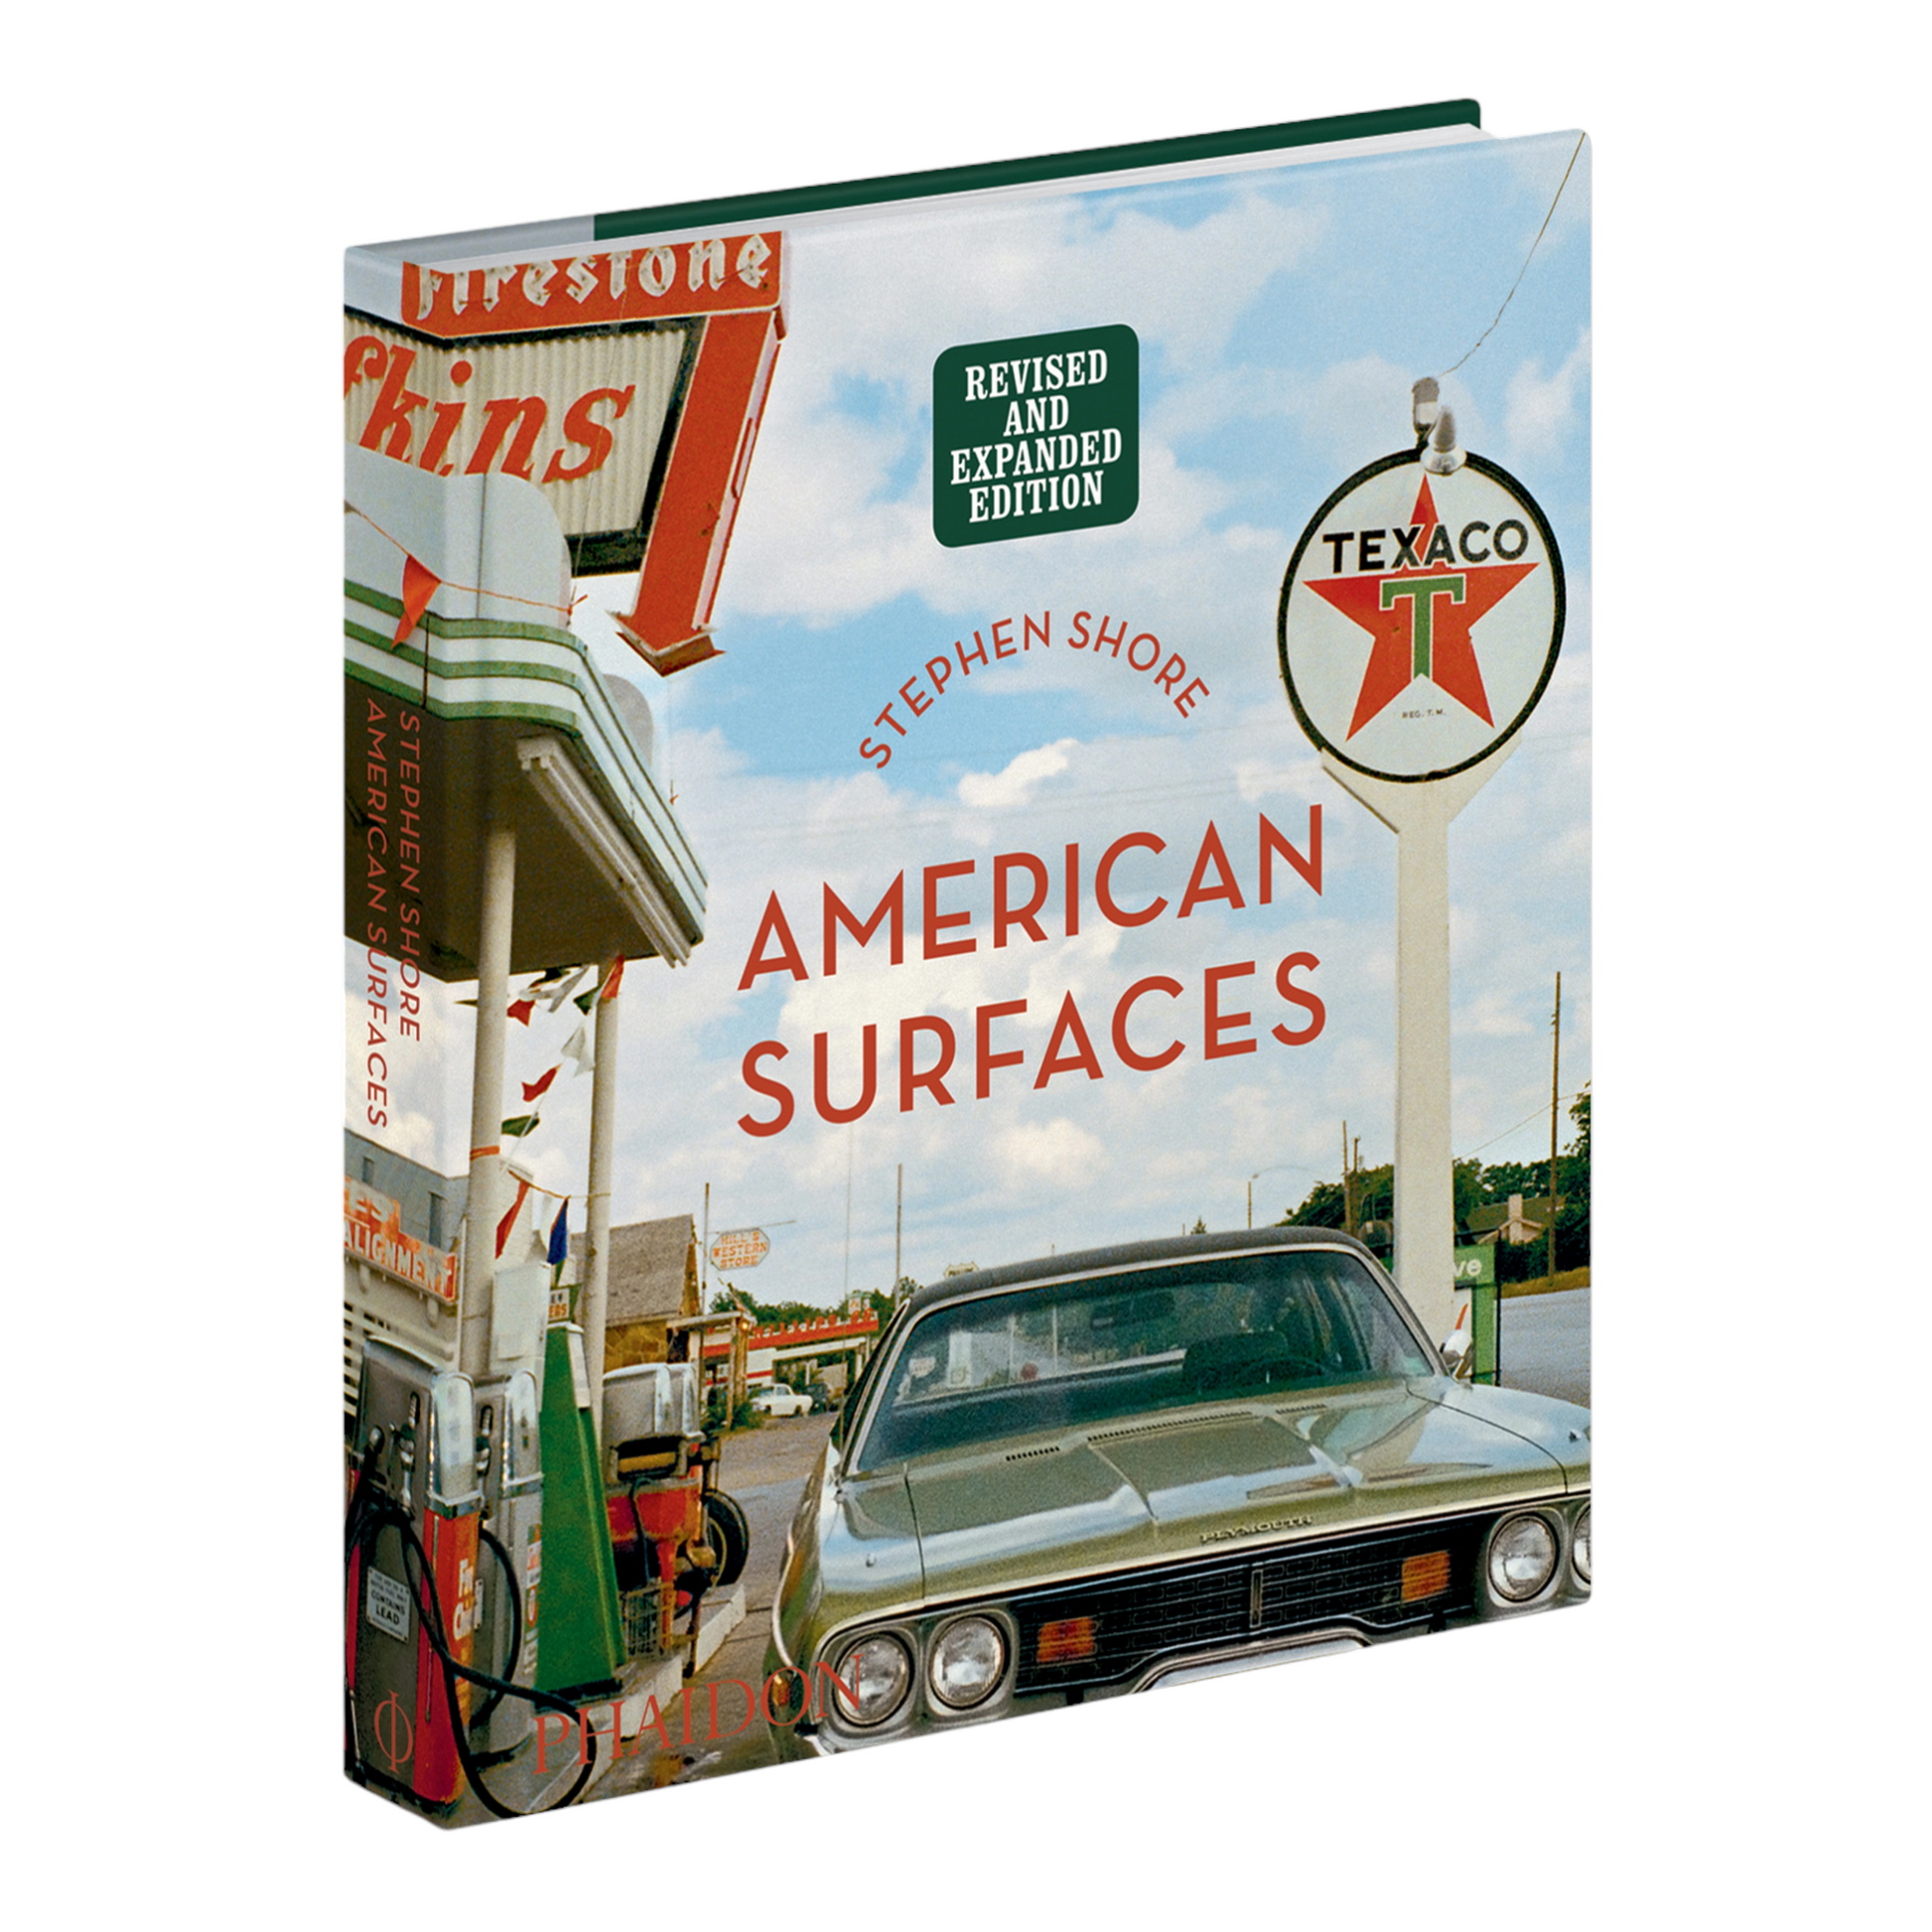 American Surfaces by Stephen Shore